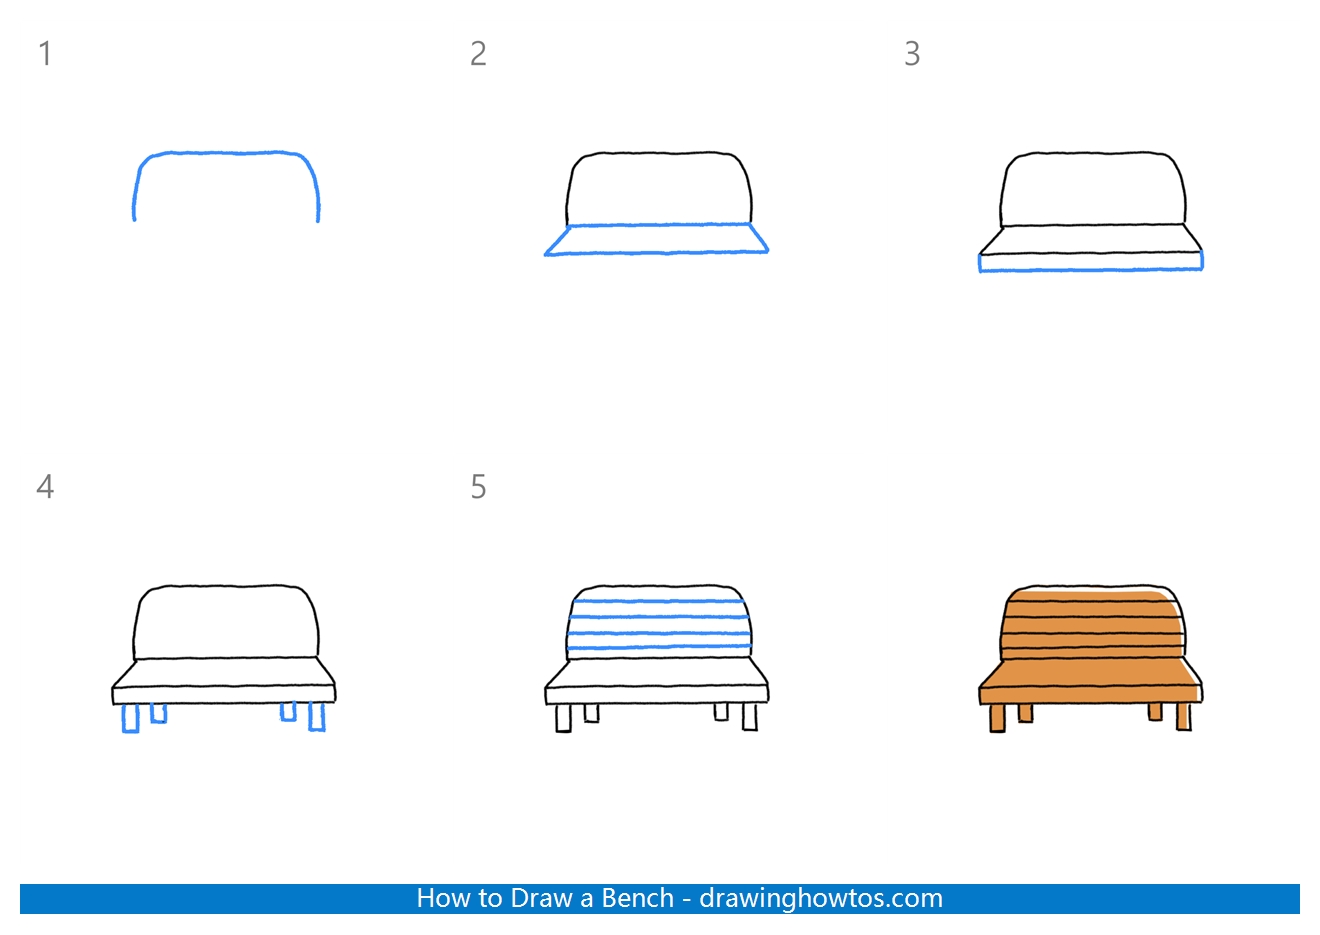 How to Draw a Bench Step by Step